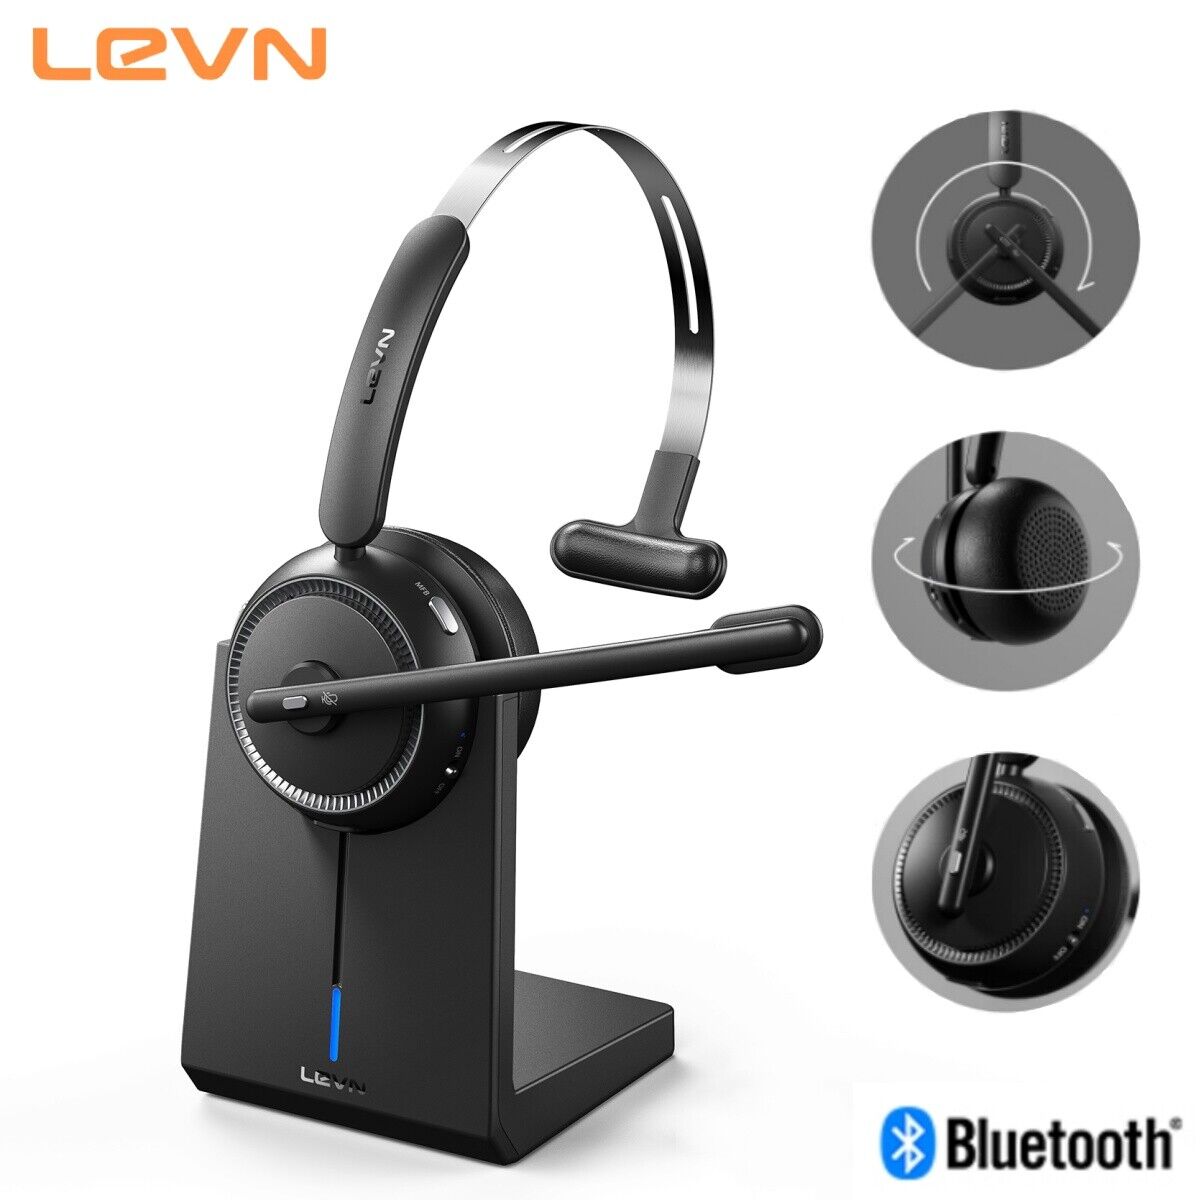 LEVN Bluetooth Wireless Headset With Noise Canceling Microphone & Mute Button